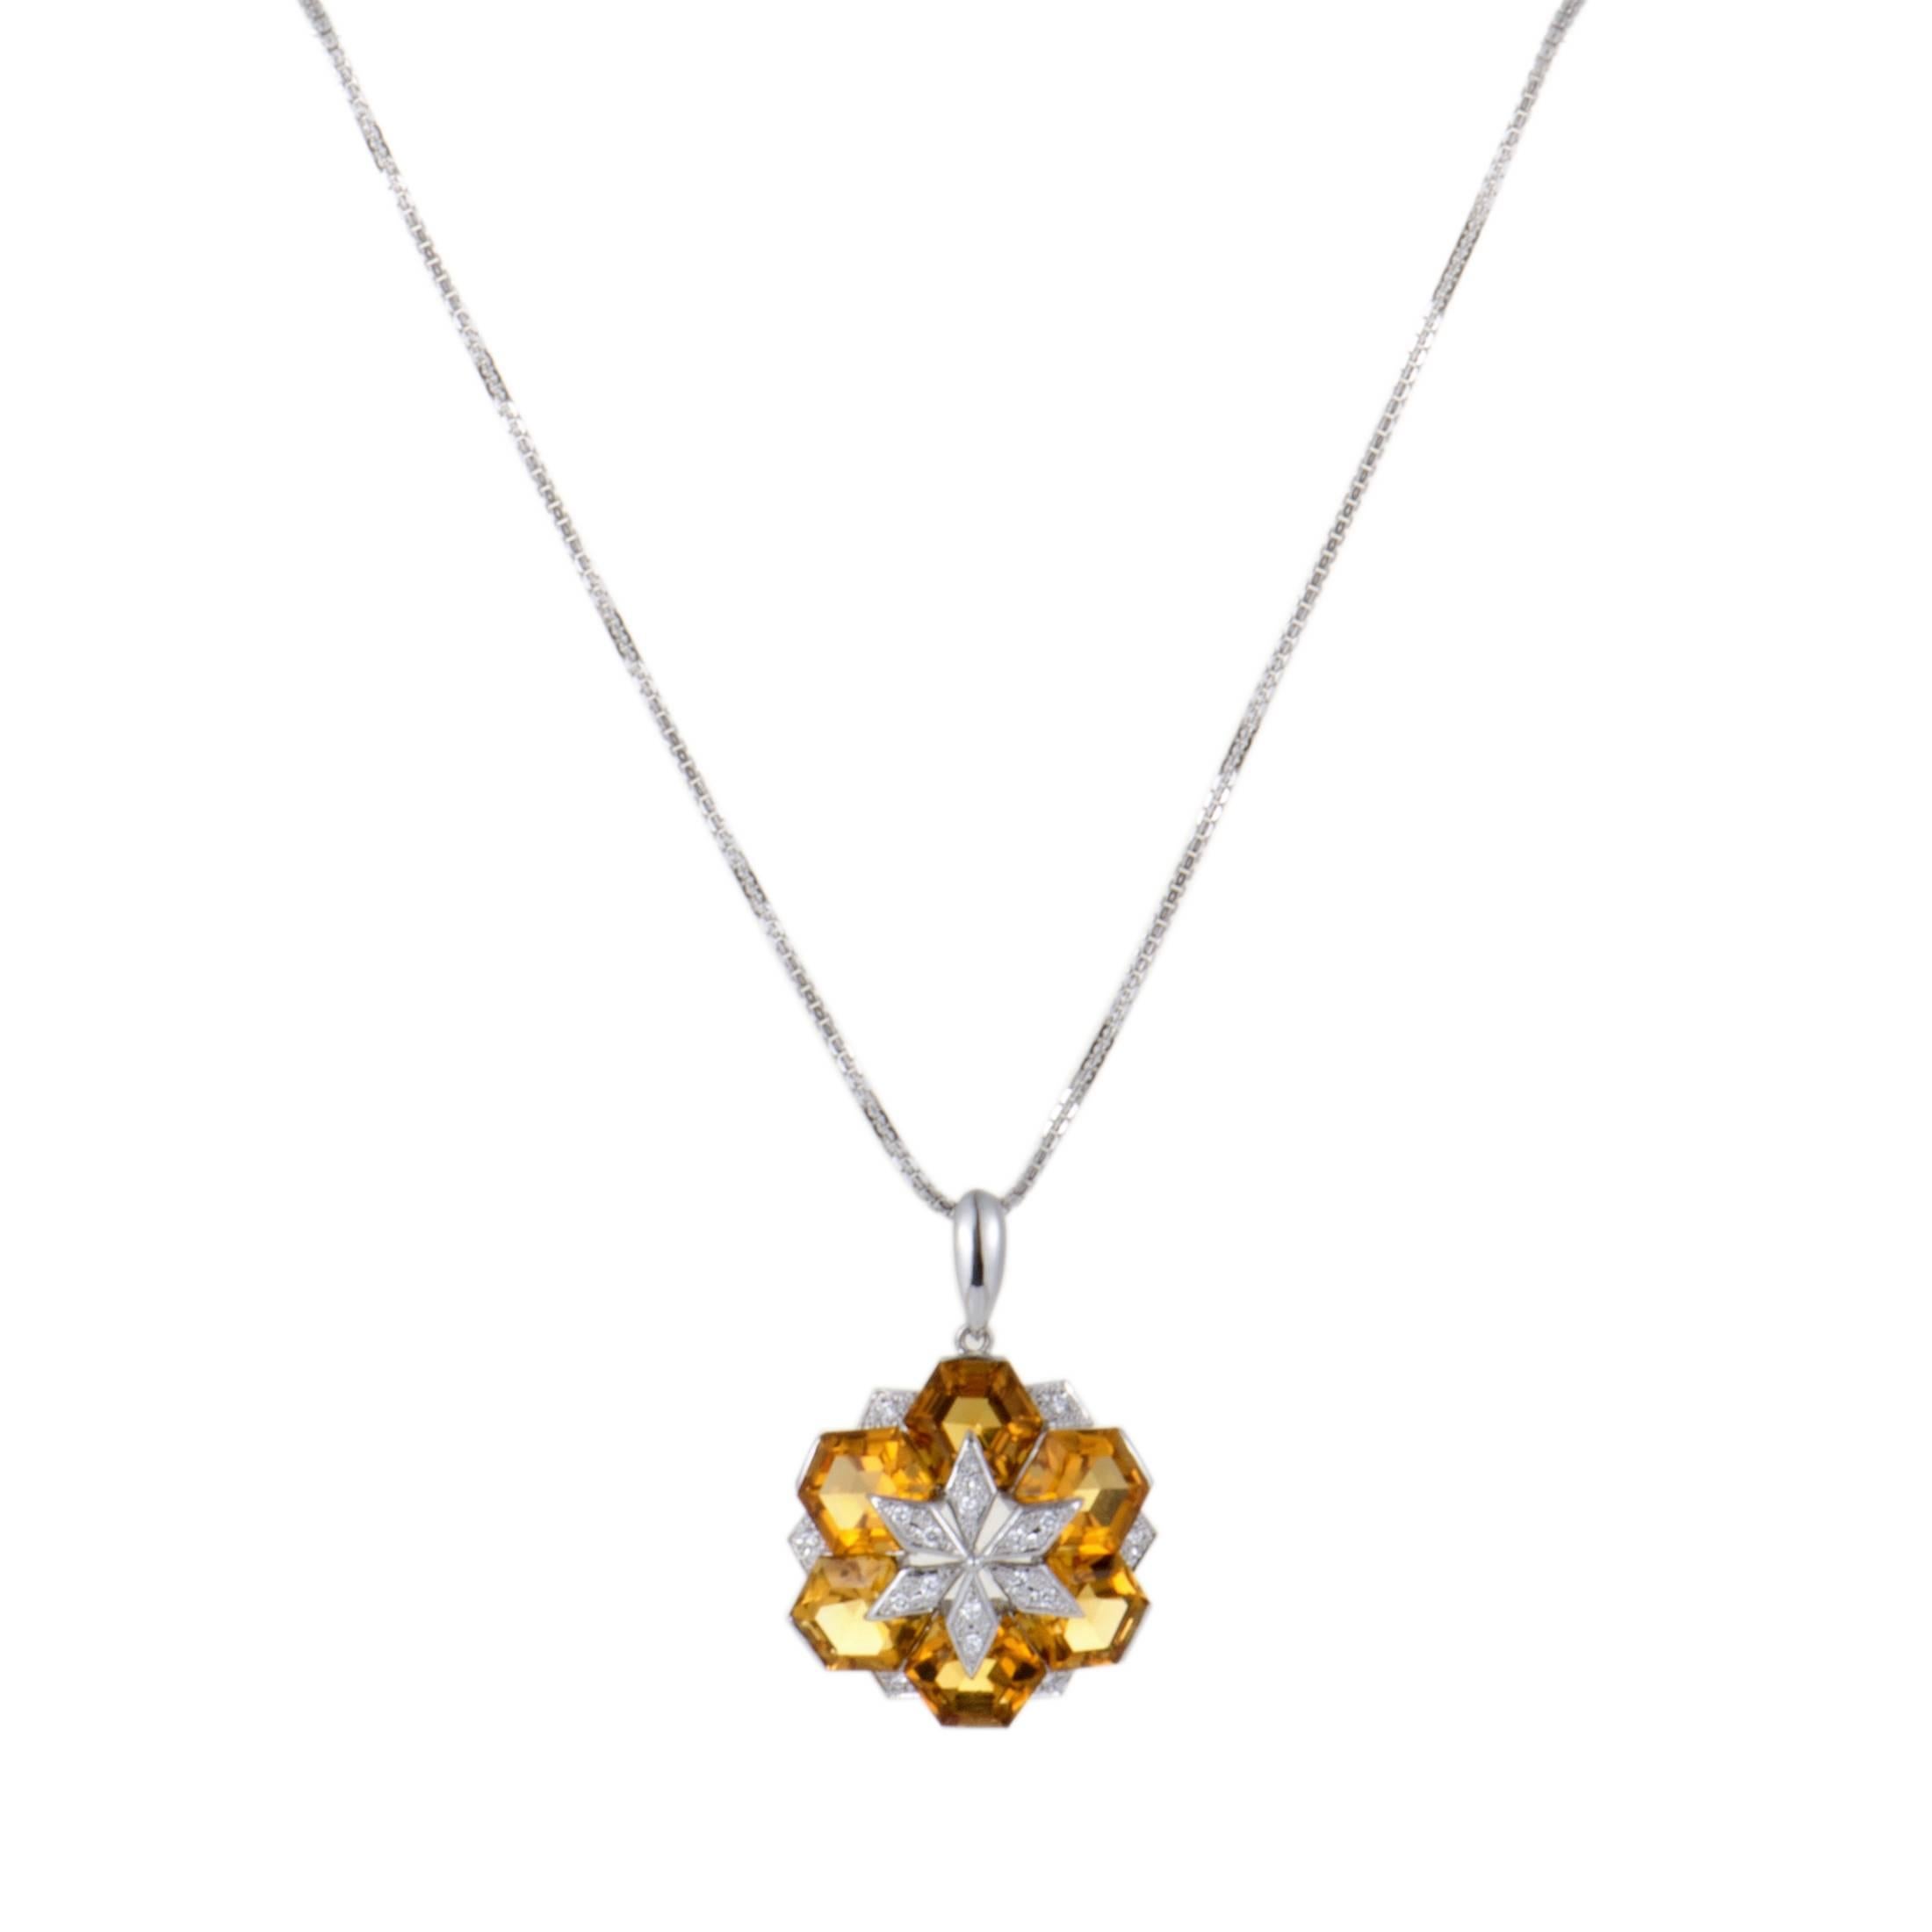 This stunning necklace features a brilliant combination of 0.16ct resplendent diamonds and 12.20ct of regal citrine stones. The necklace is made of 18K white gold and offers an incredibly luxurious appearance.
Pendant Dimensions: 1.25